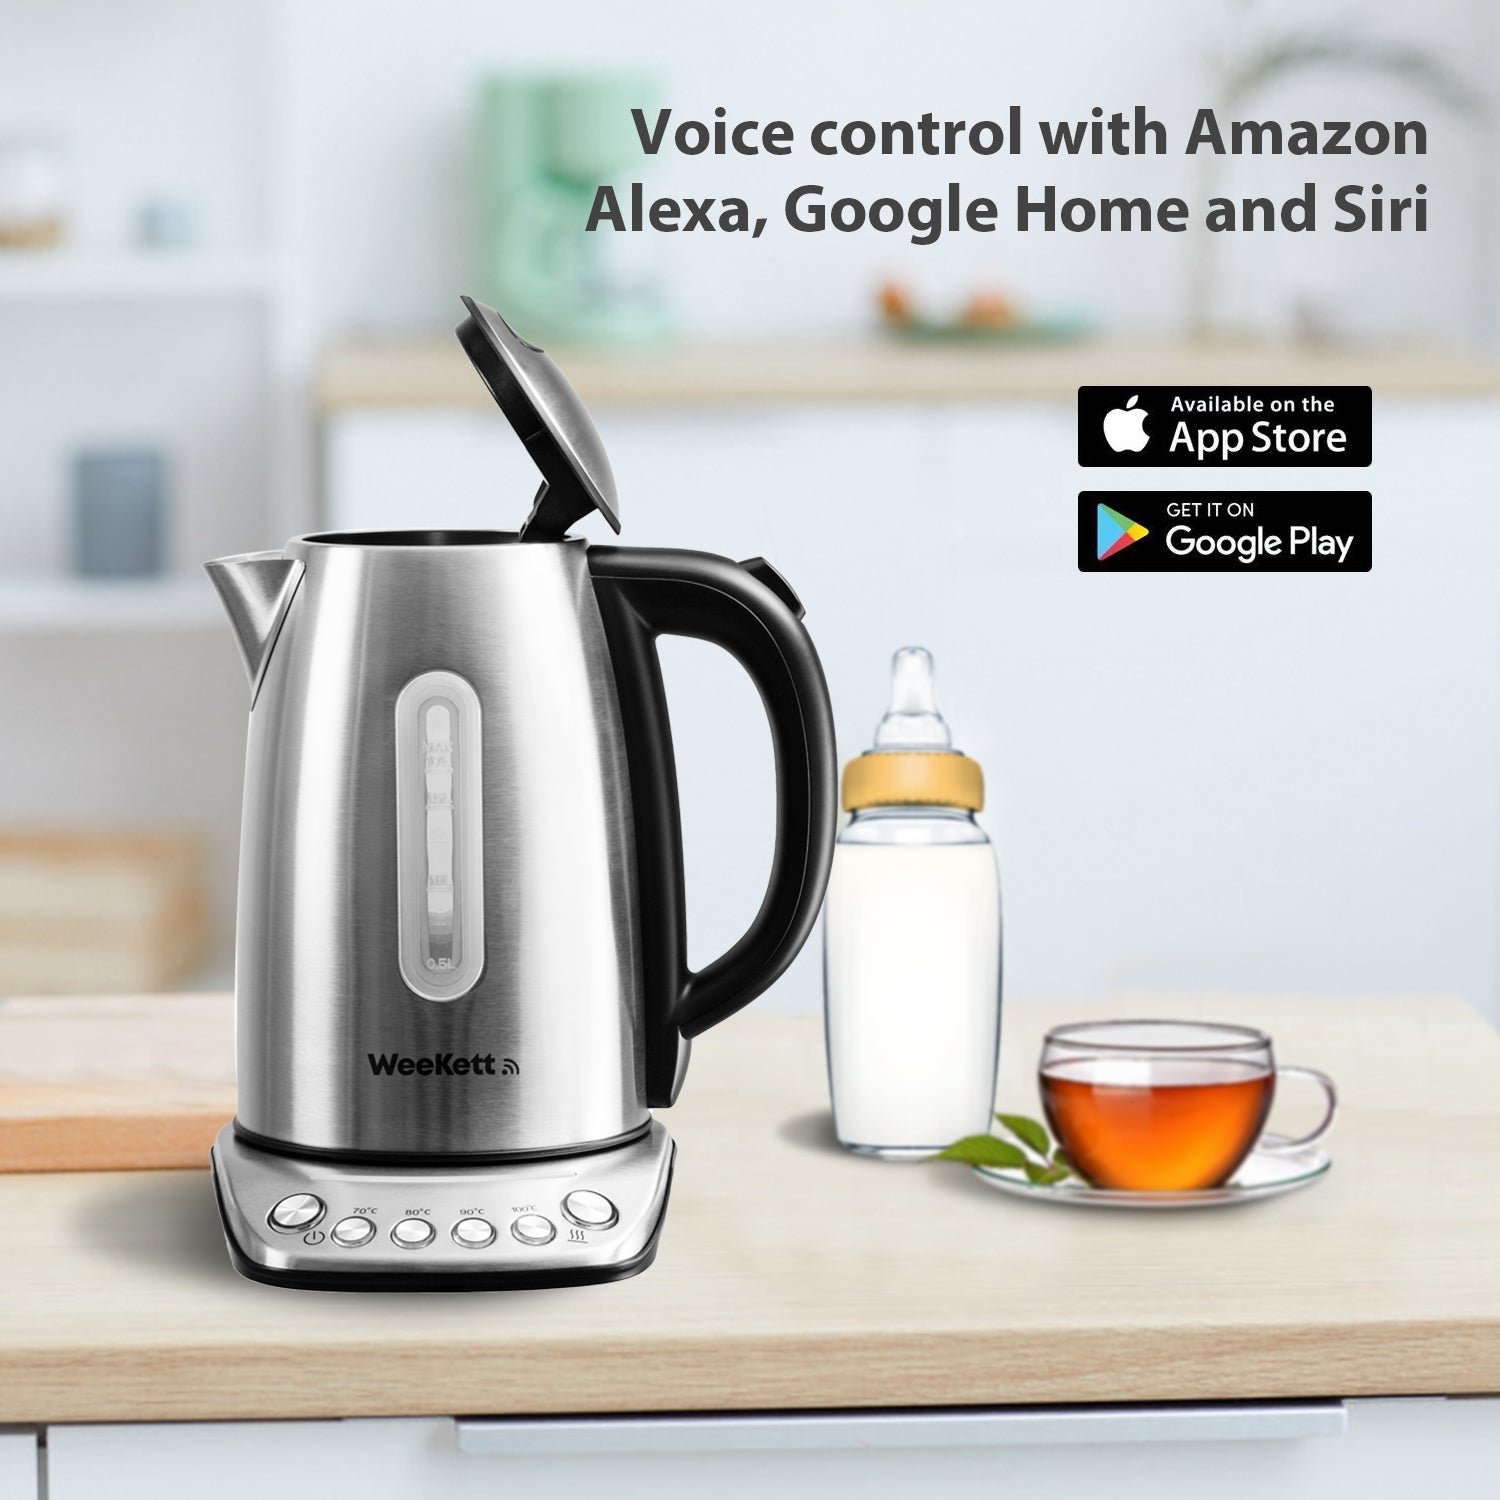 Introducing the World's first 'out the box' kettle with Alexa –  AboutMyGeneration